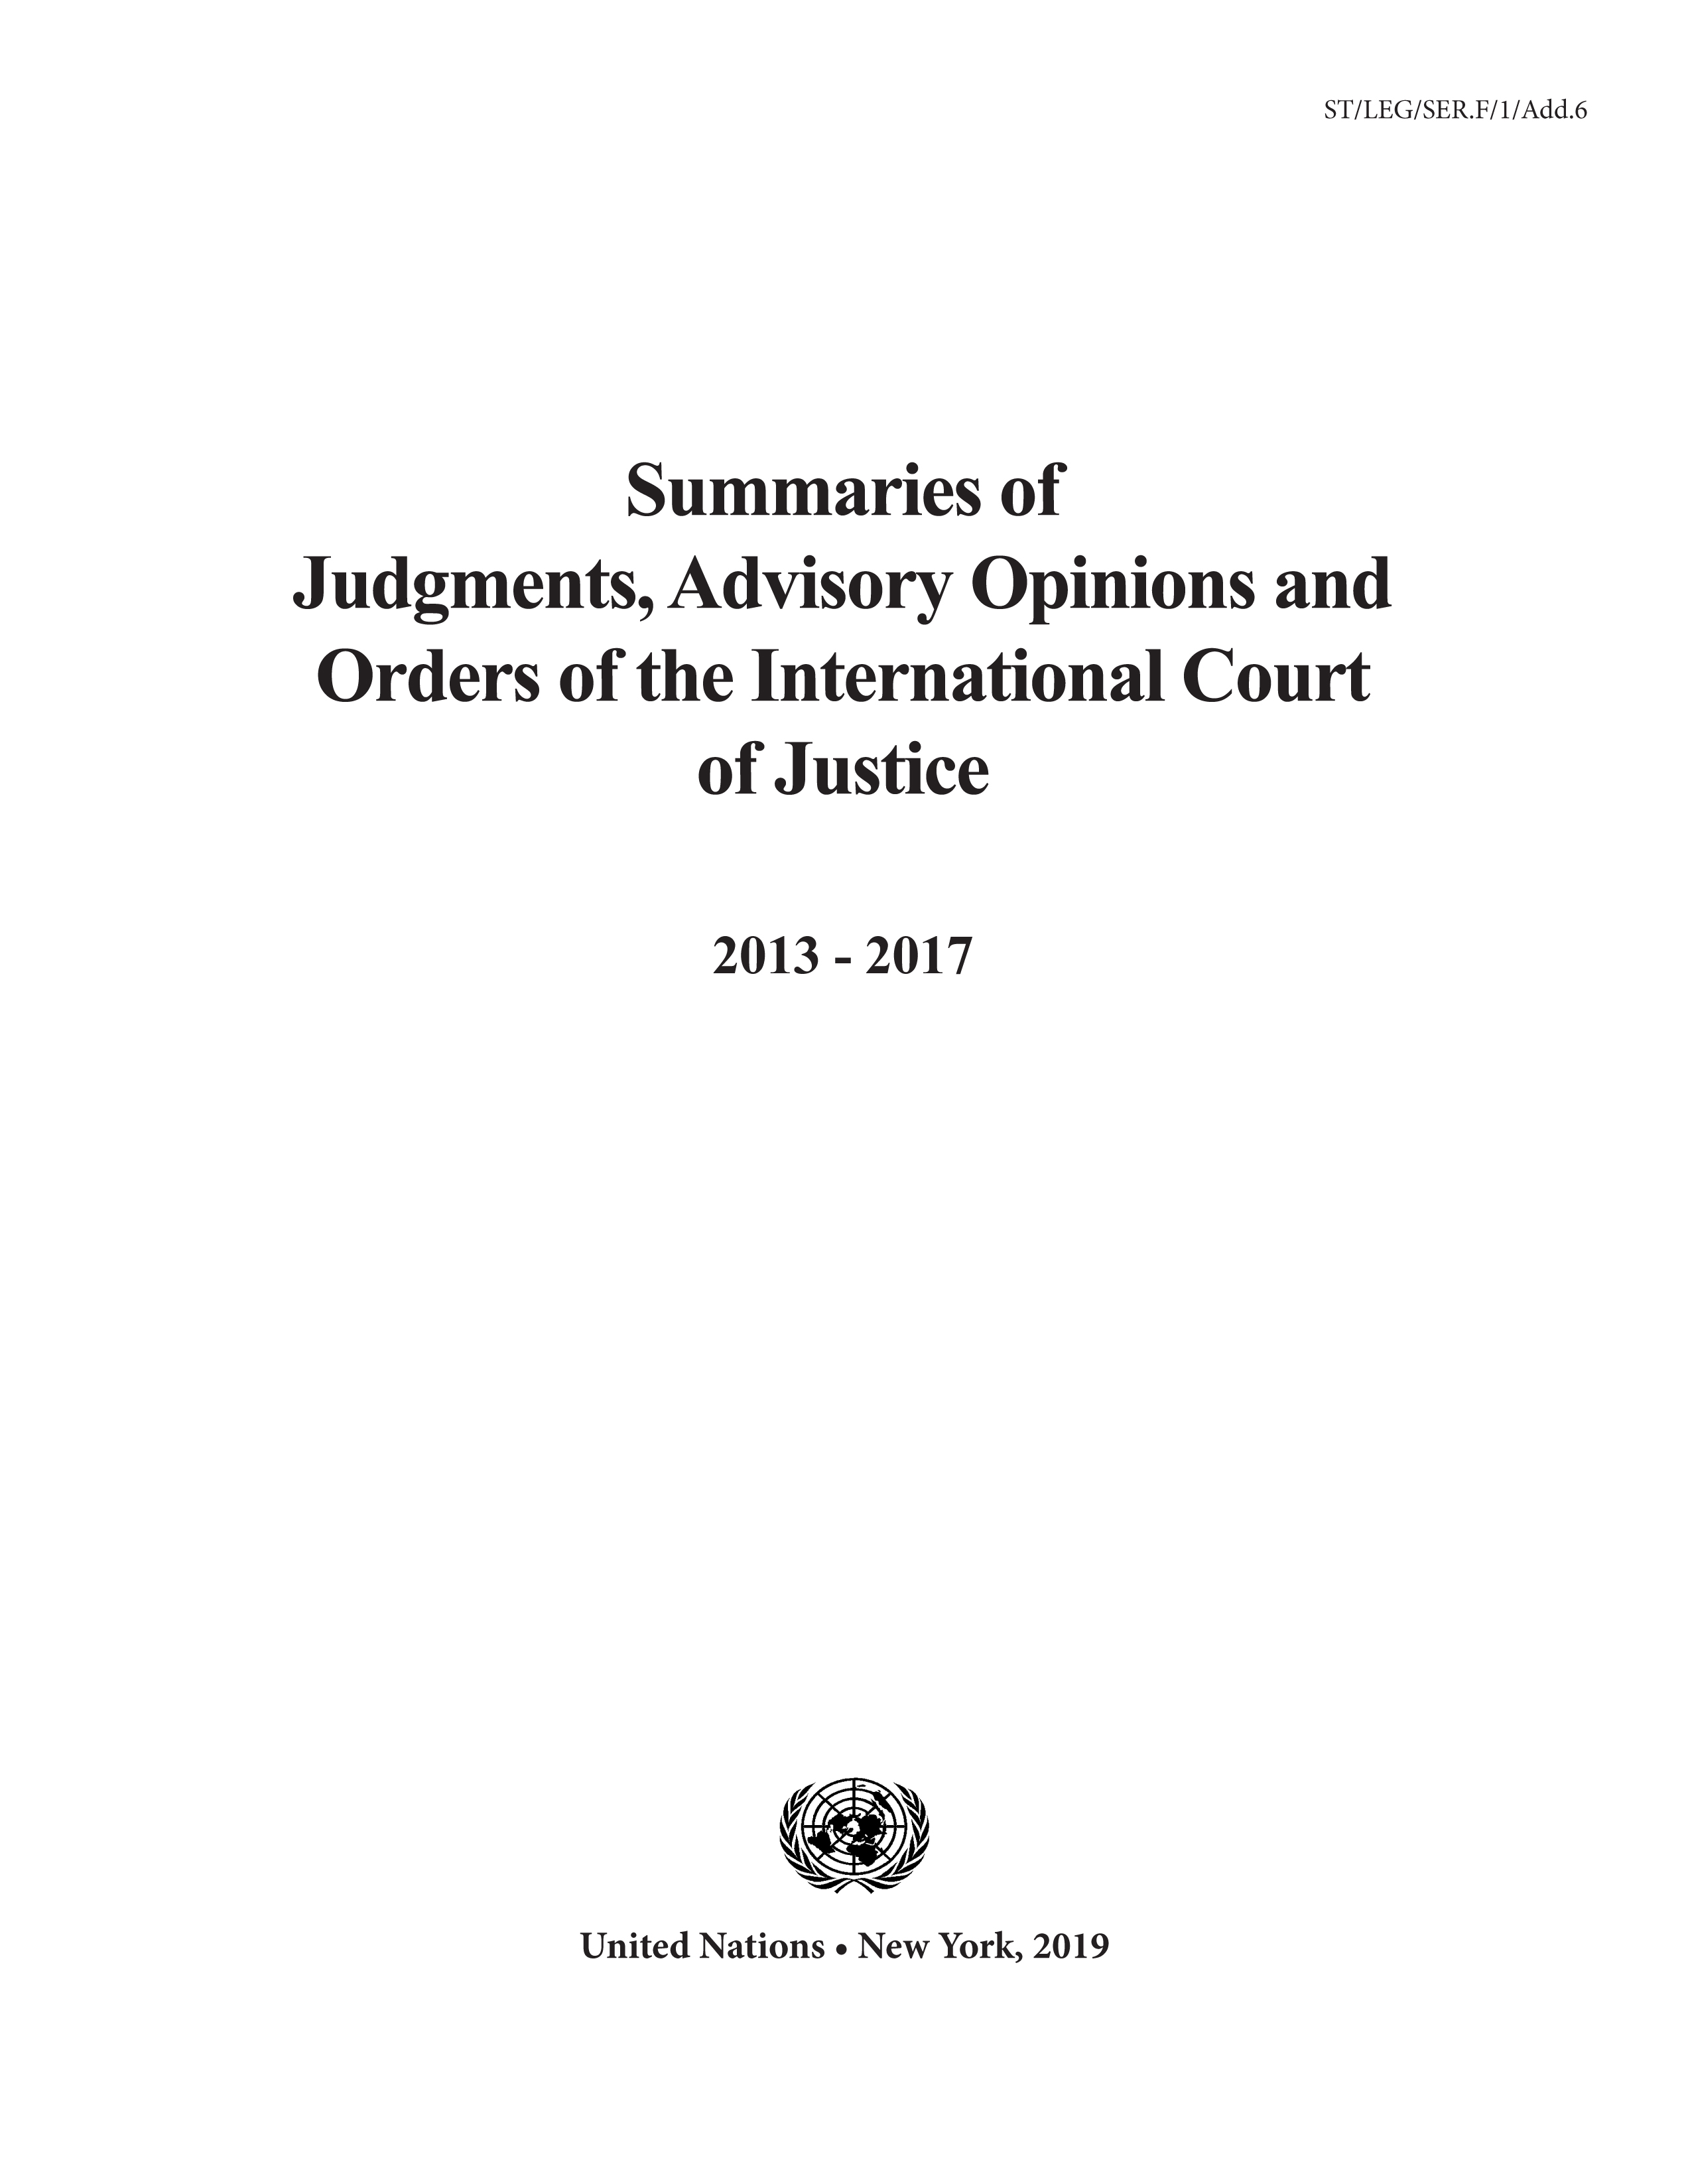 image of Summaries of Judgments, Advisory Opinions and Orders of the International Court of Justice 2013-2017